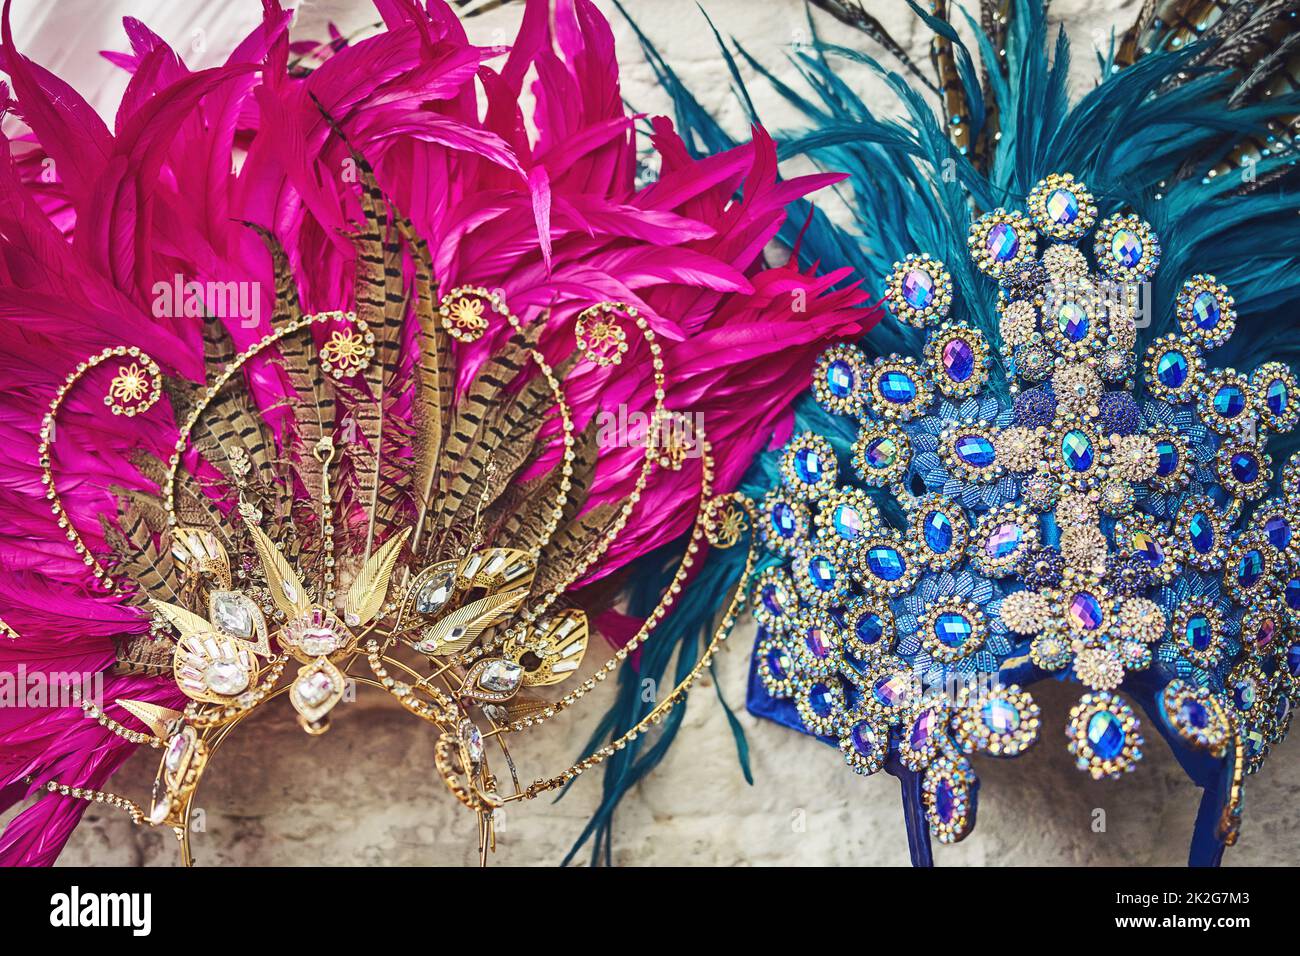 Ready for the show. Still life shot of costume headwear for samba dancers. Stock Photo